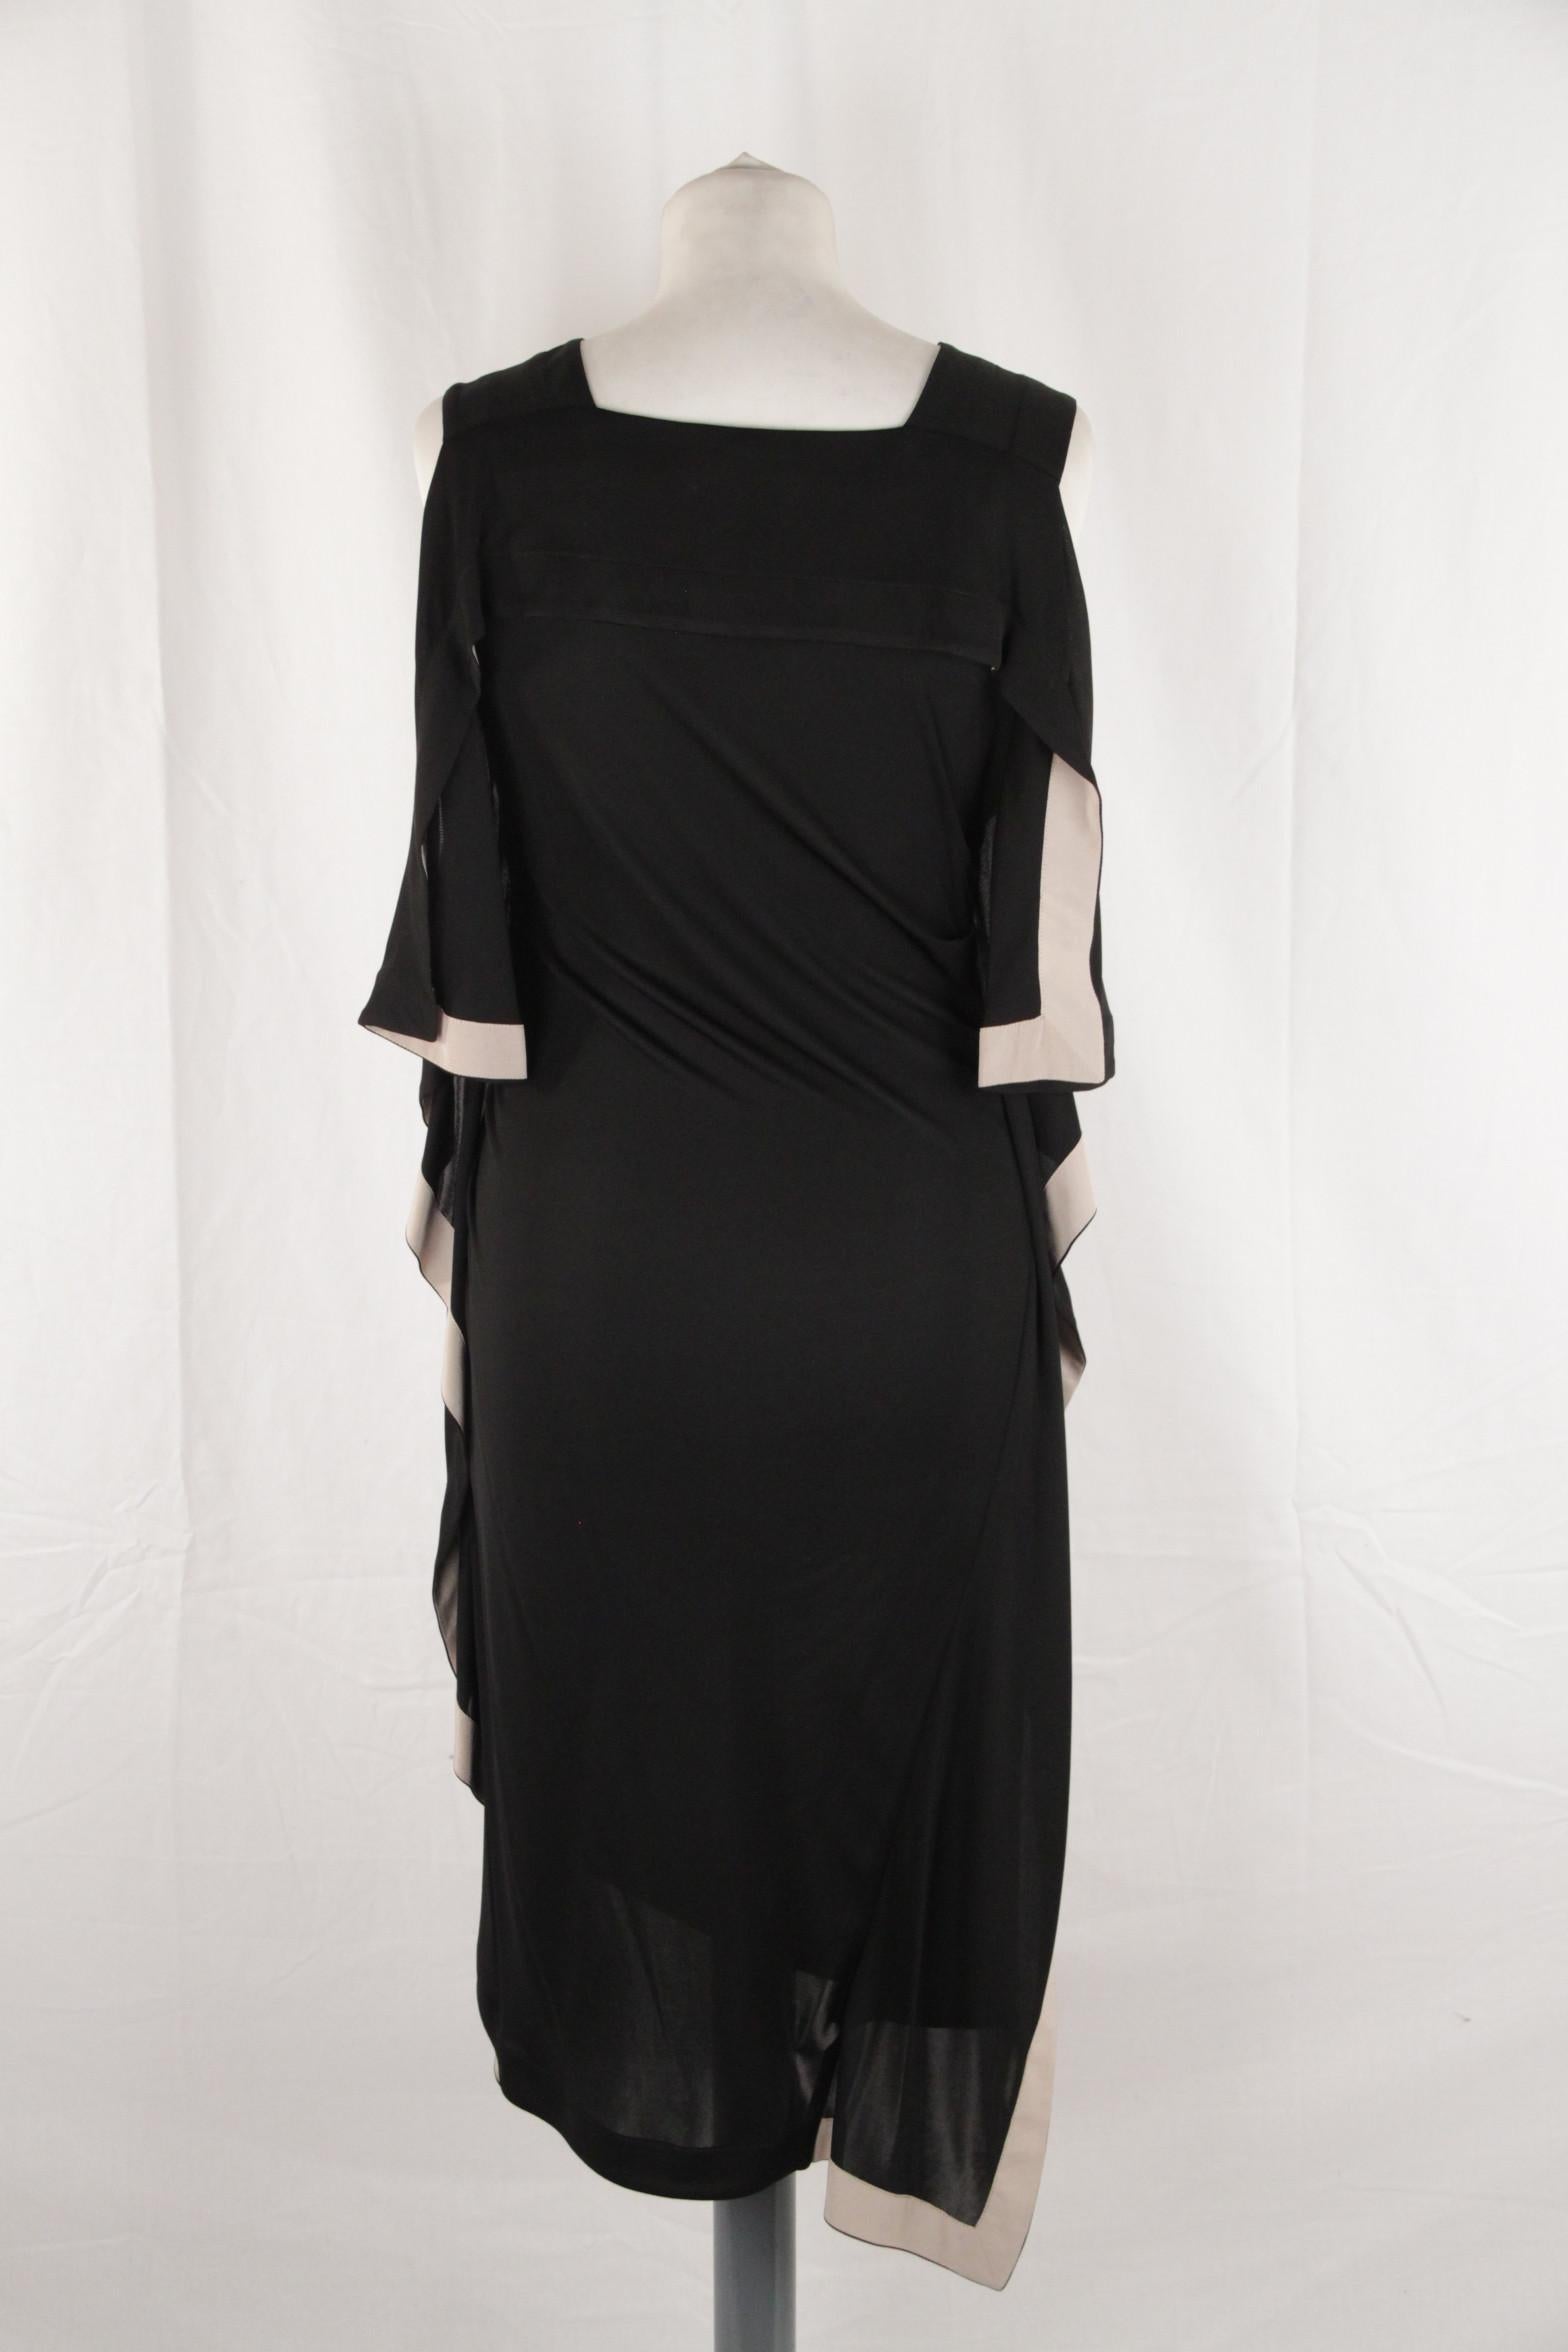 Vionnet Black Silky Sleeveless Dress Knee Lenght with Frills In Excellent Condition In Rome, Rome